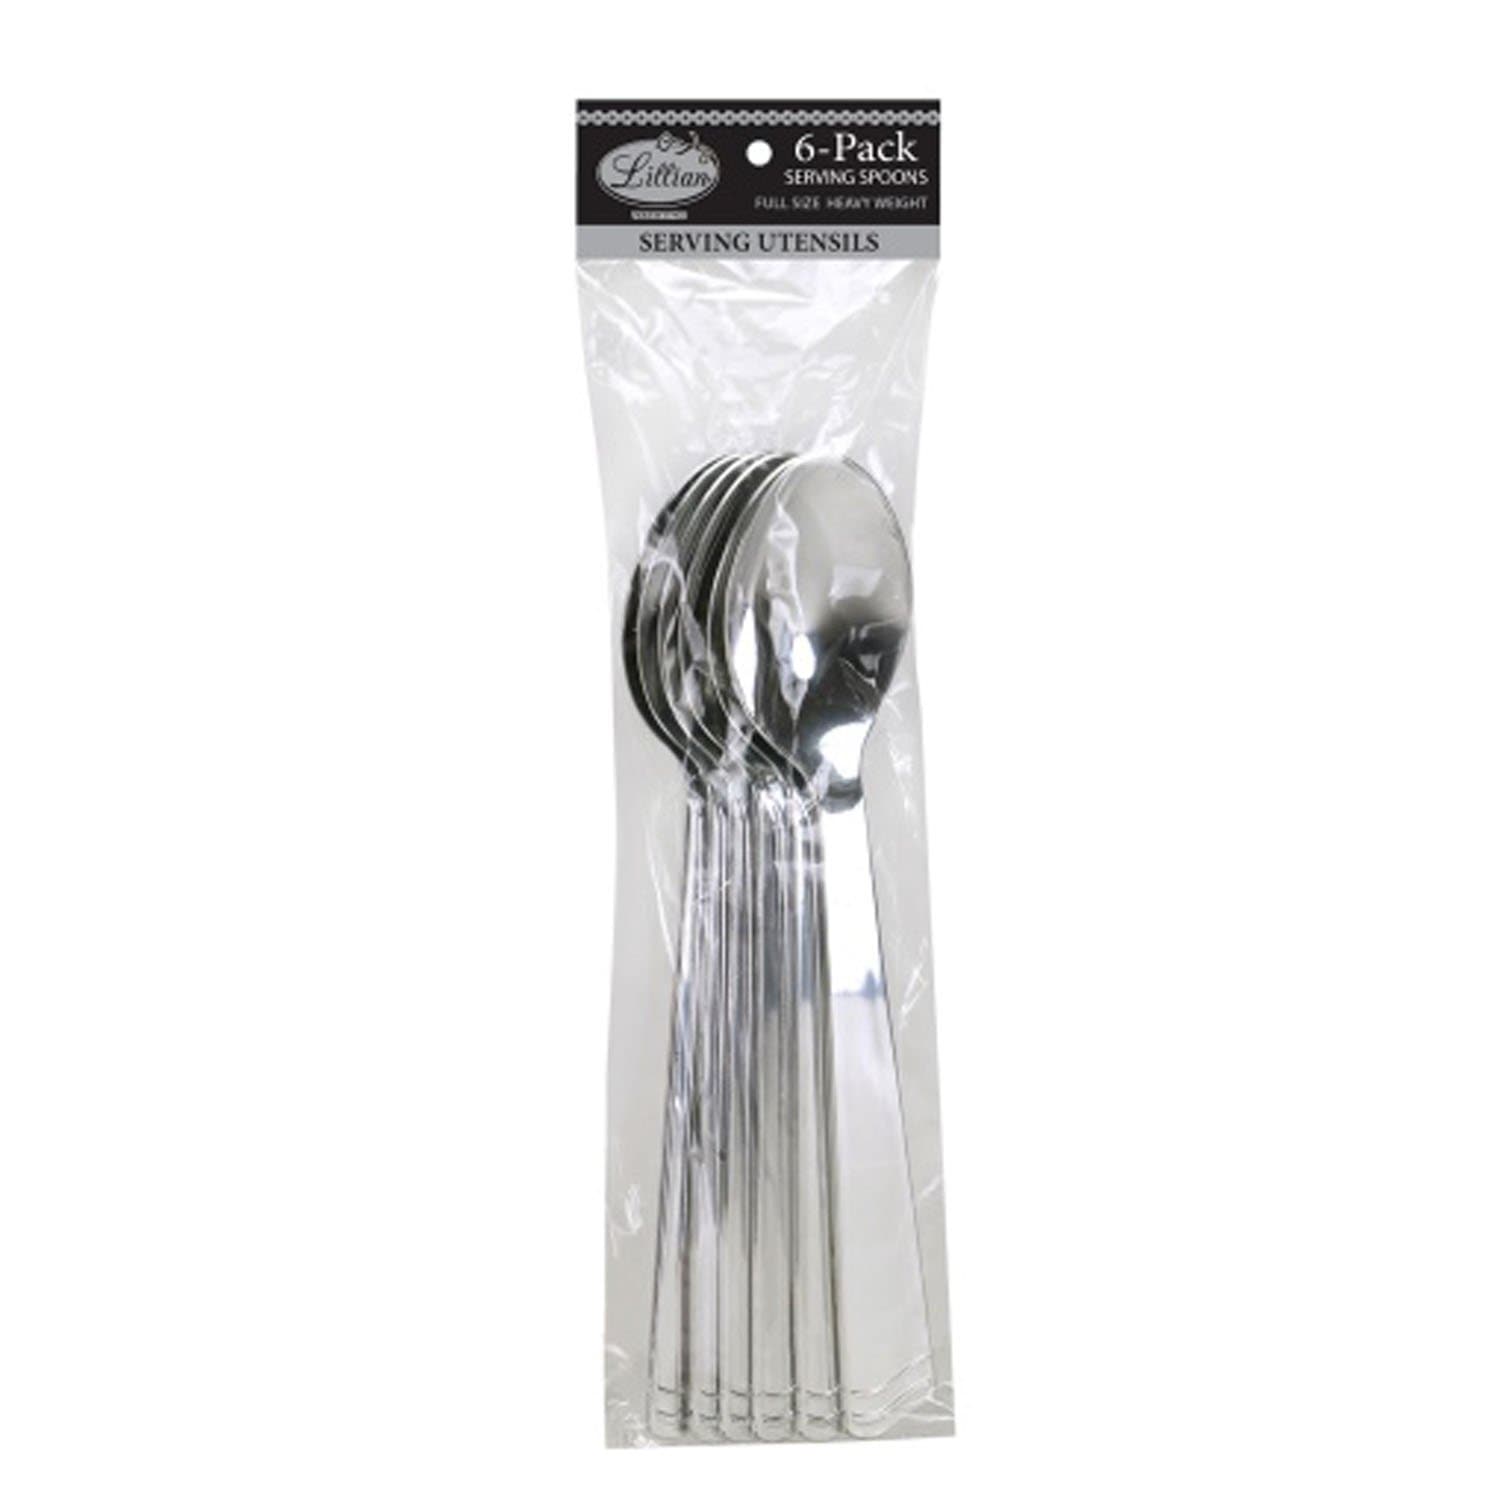 Serving spoon silver polished set 6pc 10" Tablesettings Lillian   